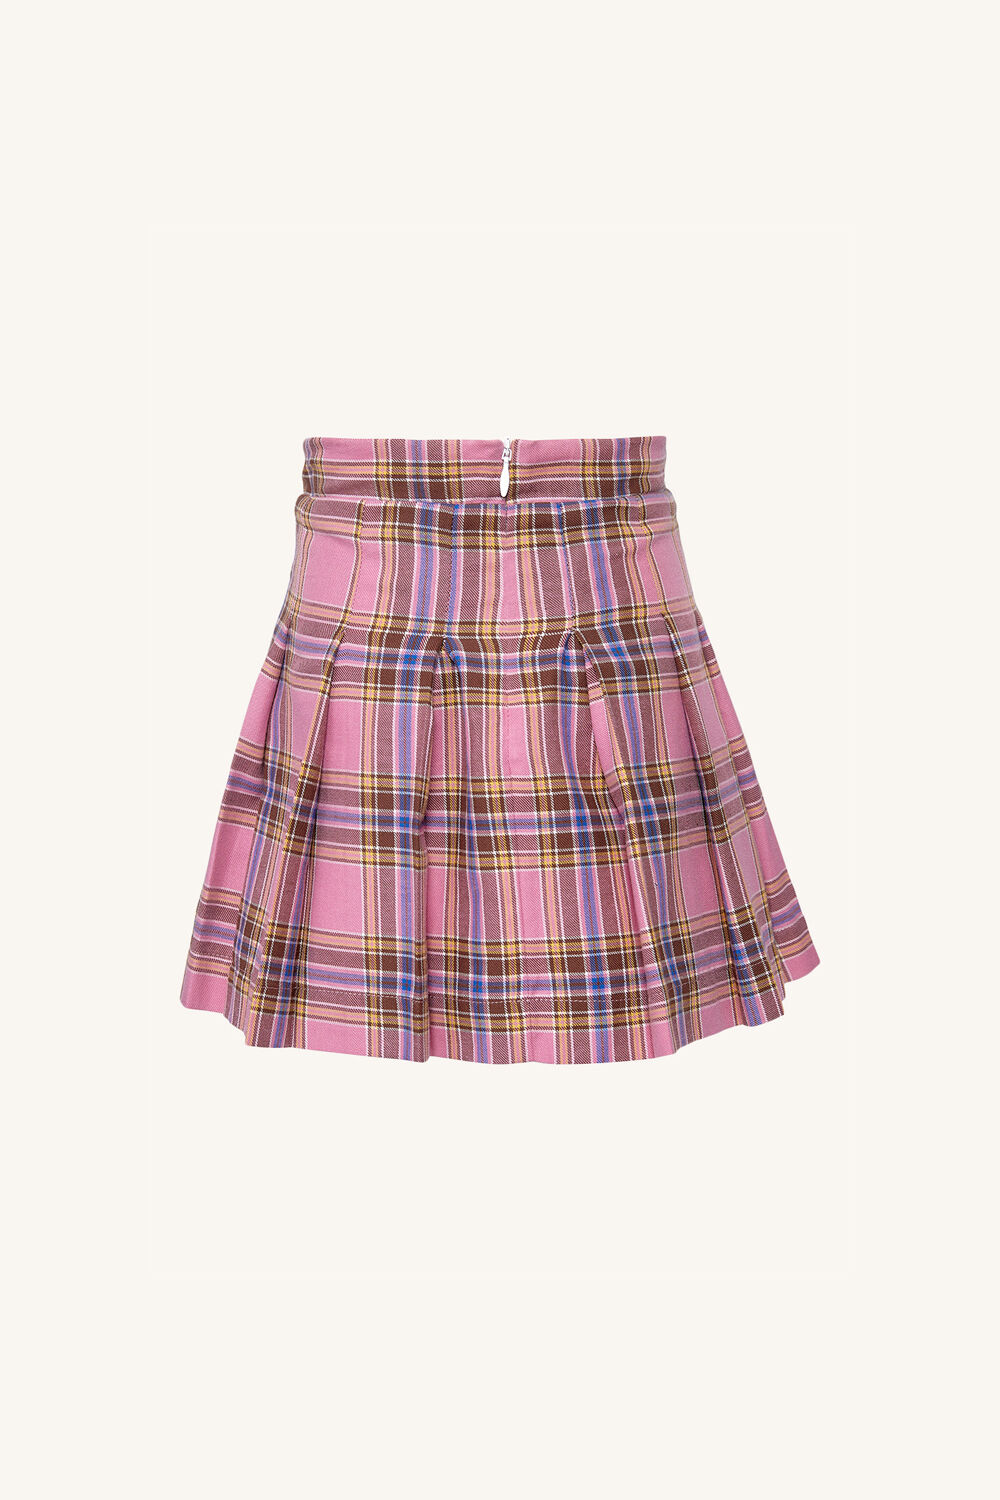 GIRLS PINK CHECK PLEAT SKIRT in colour PEARL